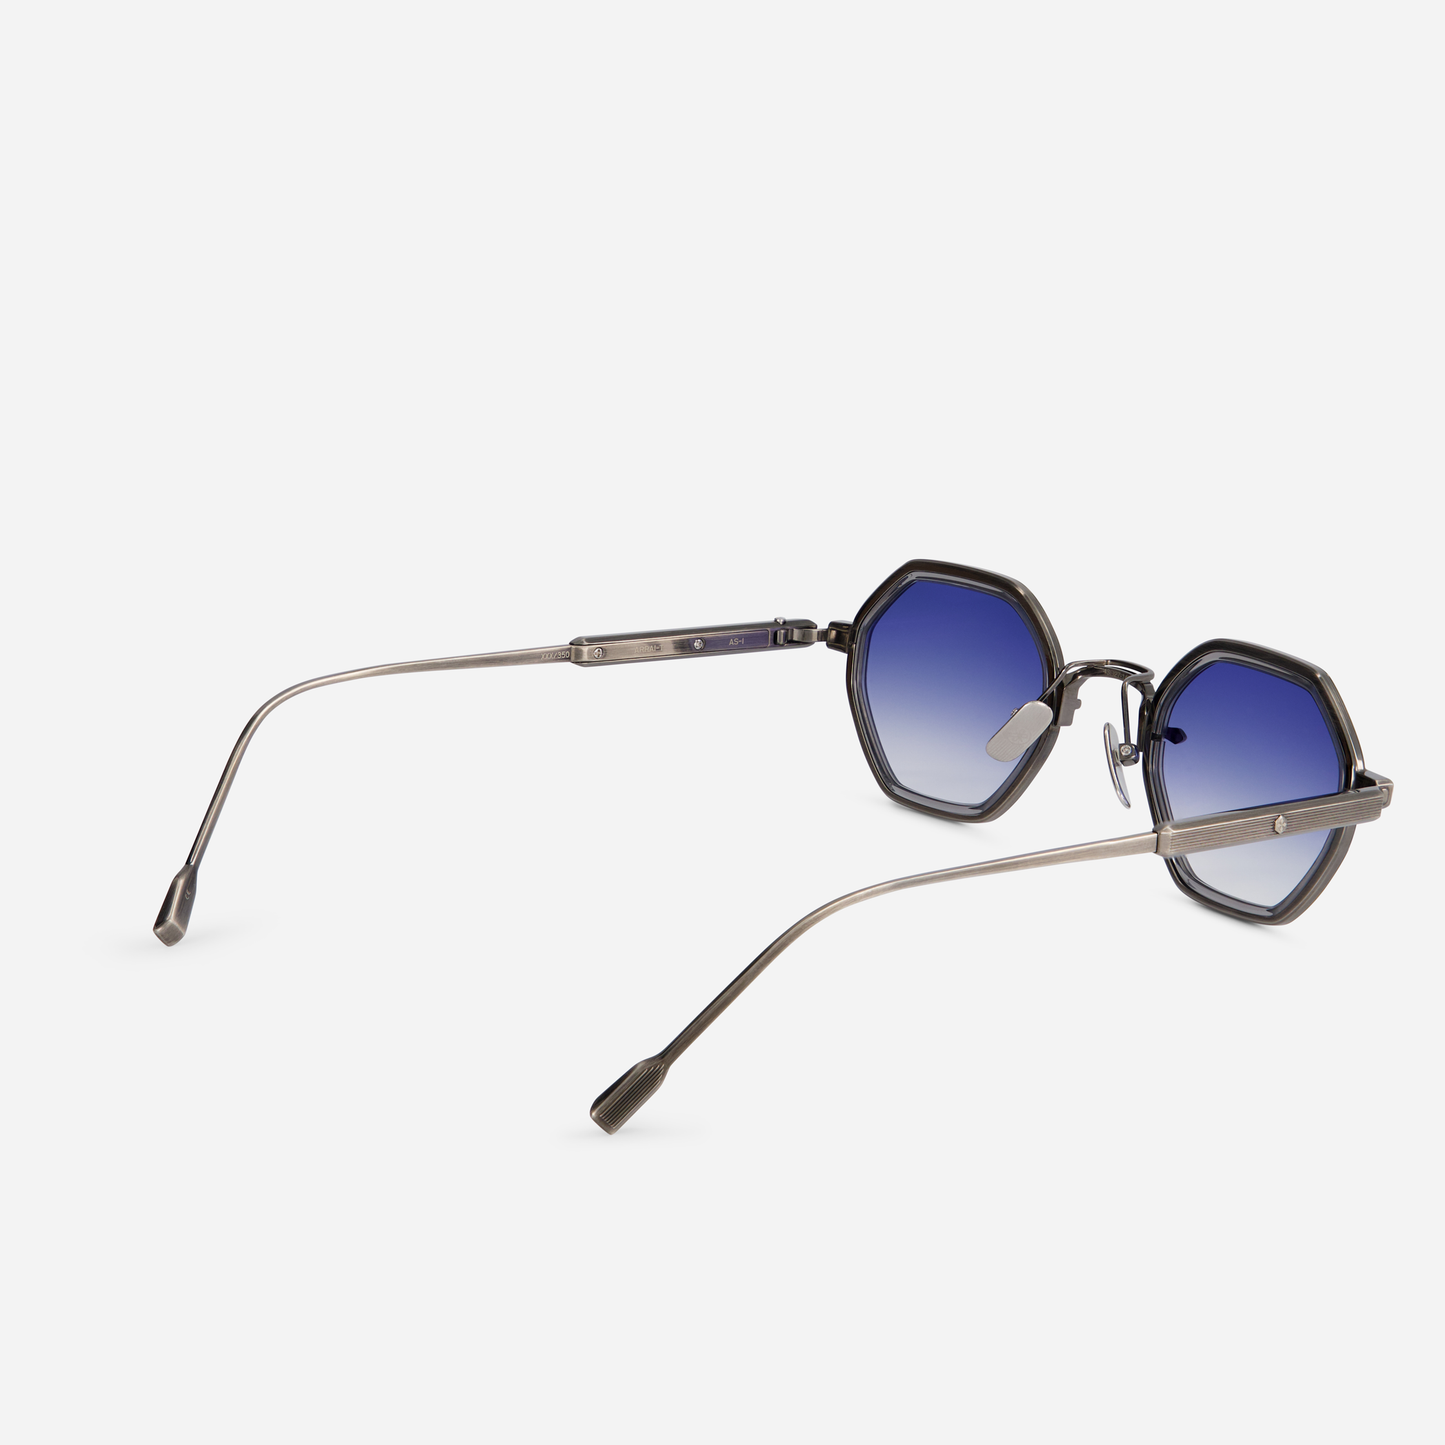 Arraï-T AS-1 is designed with a titanium frame, antique silver coating, a crystal grey takiron rim insert, and gradient blue lenses.